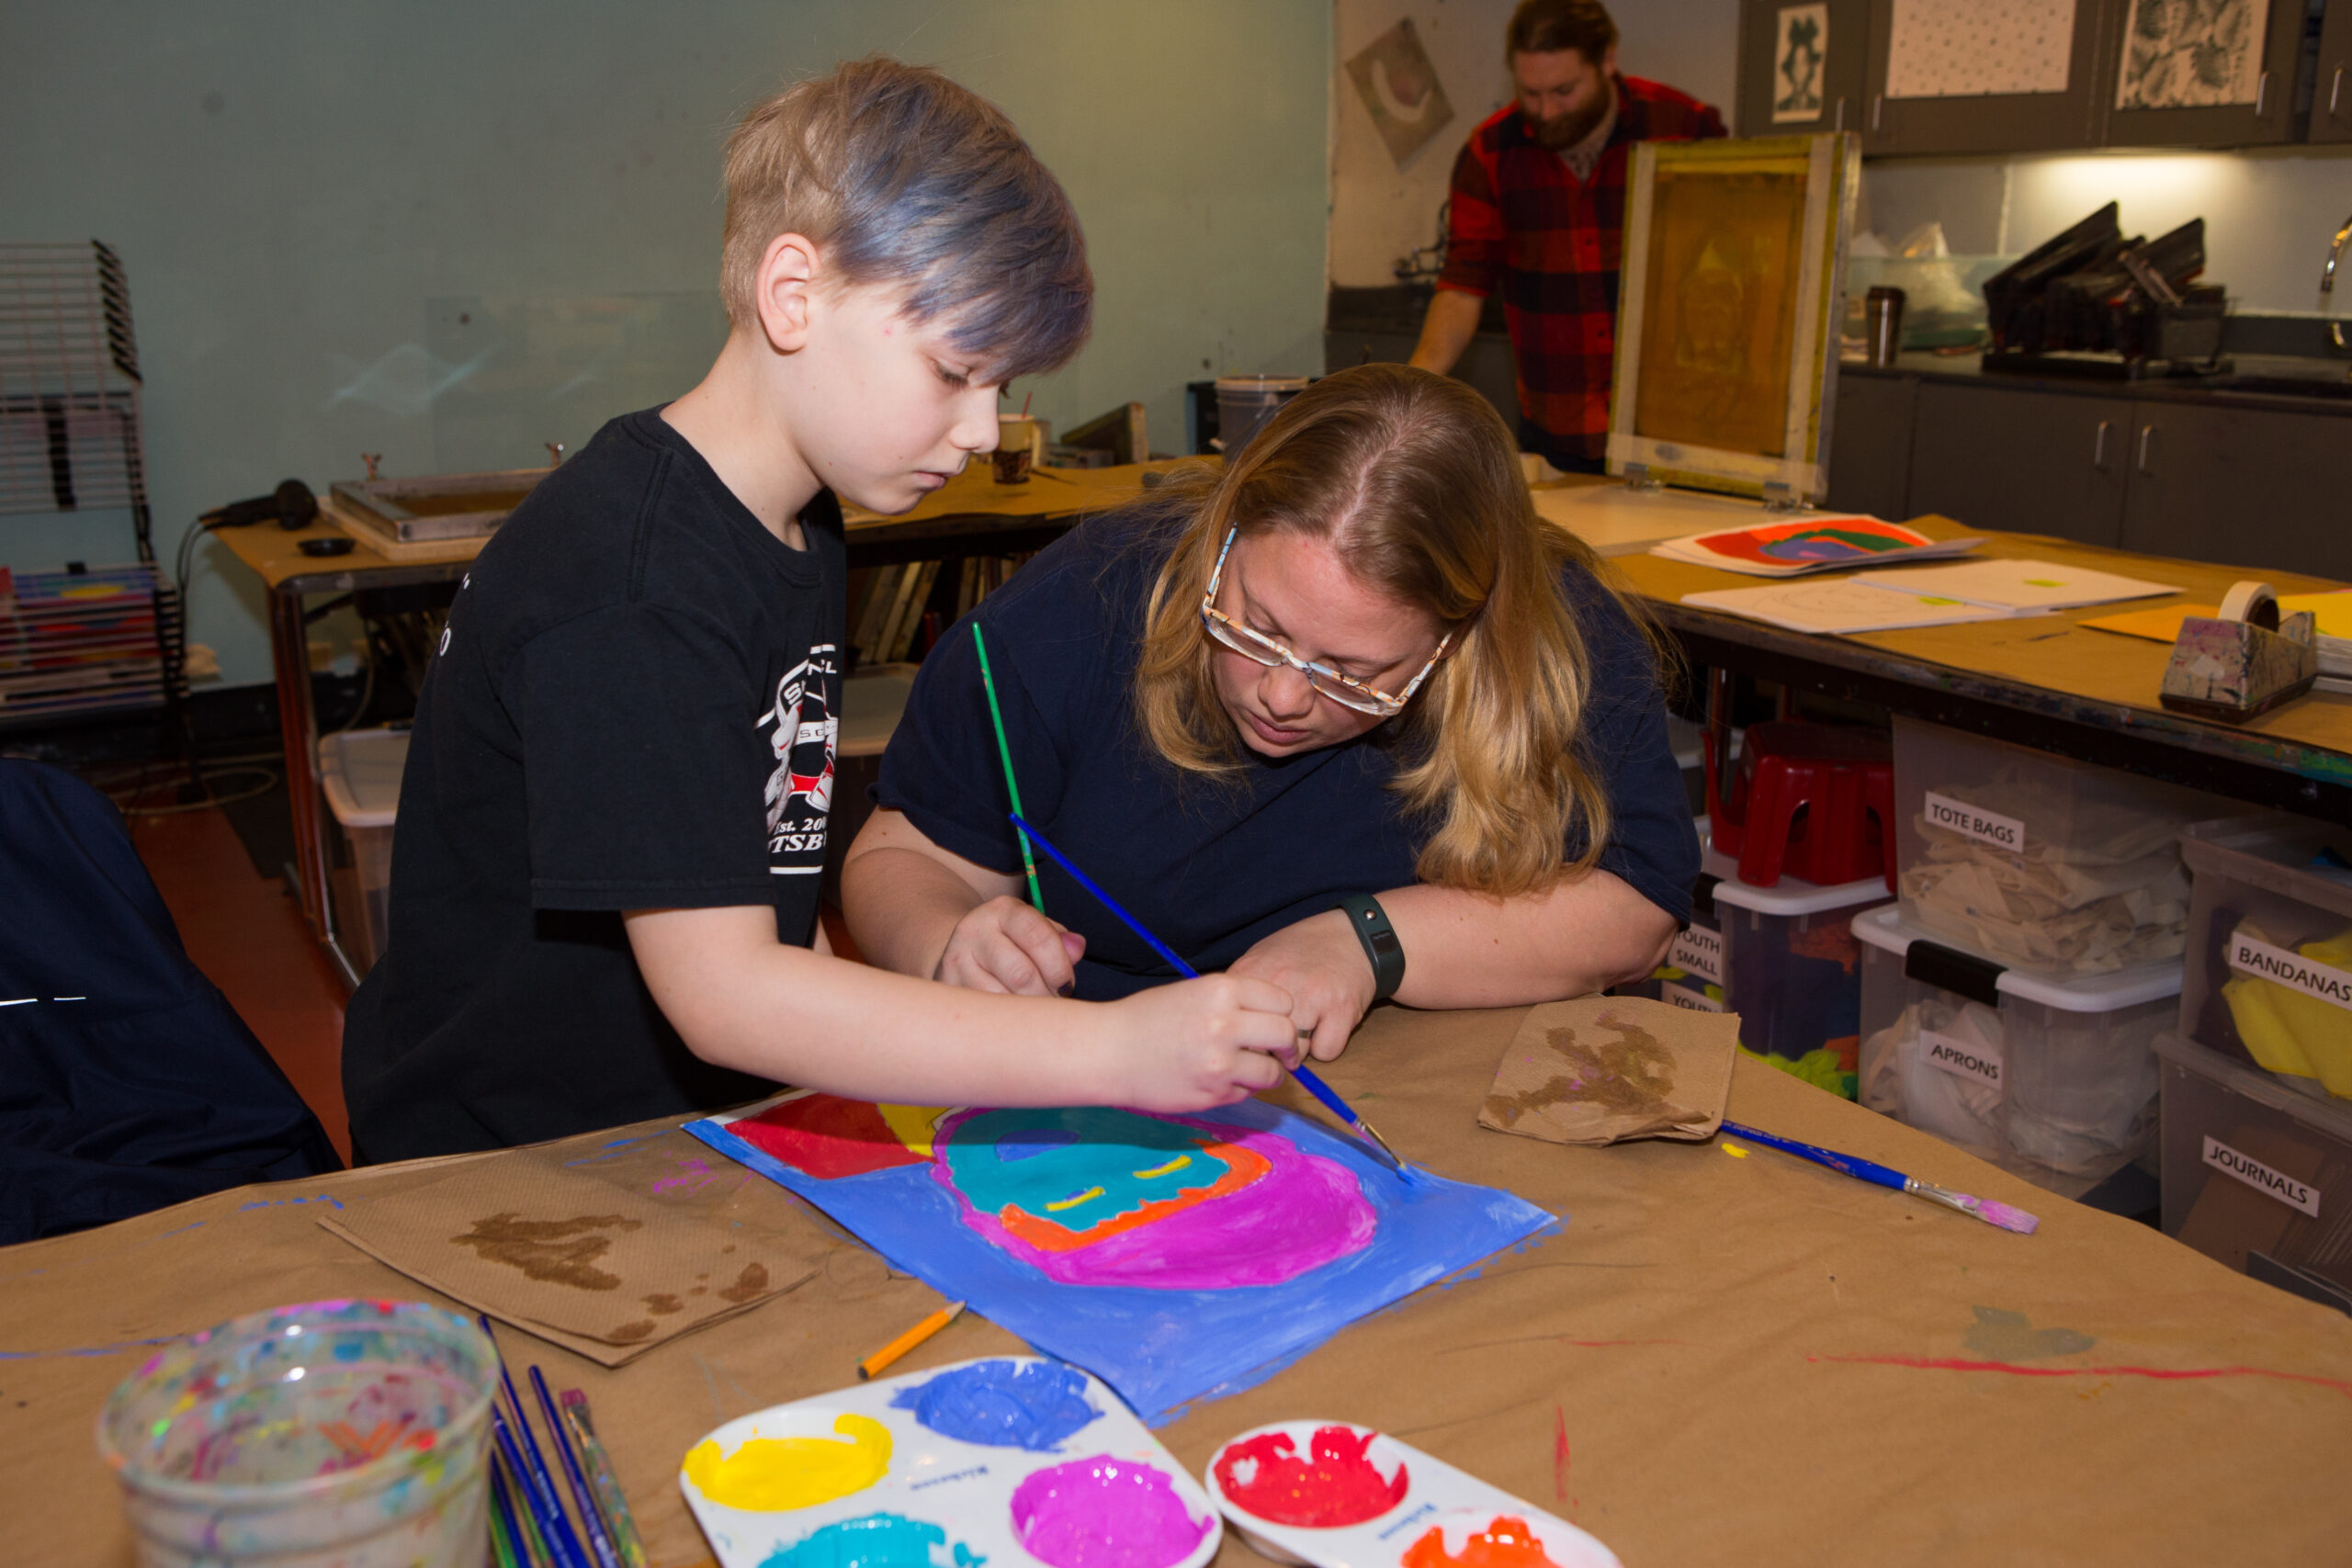 A child and an adult work on a Warhol-inspired painting in The Factory, the museum's underground studio.